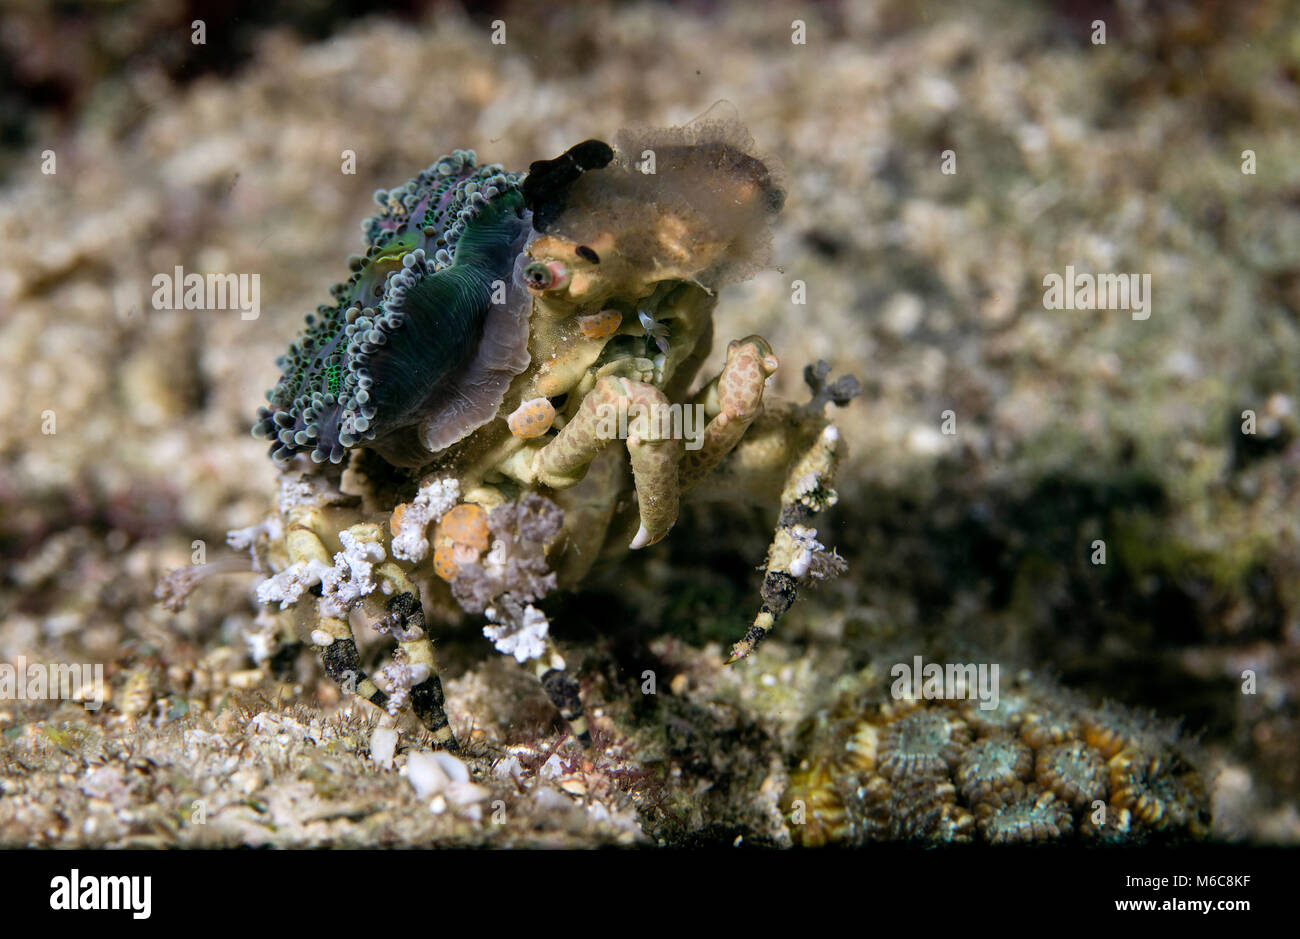 Corallimorph Decorator Crab (Cyclocoeloma tuberculata). Picture was taken in Moalboal, Philippines Stock Photo